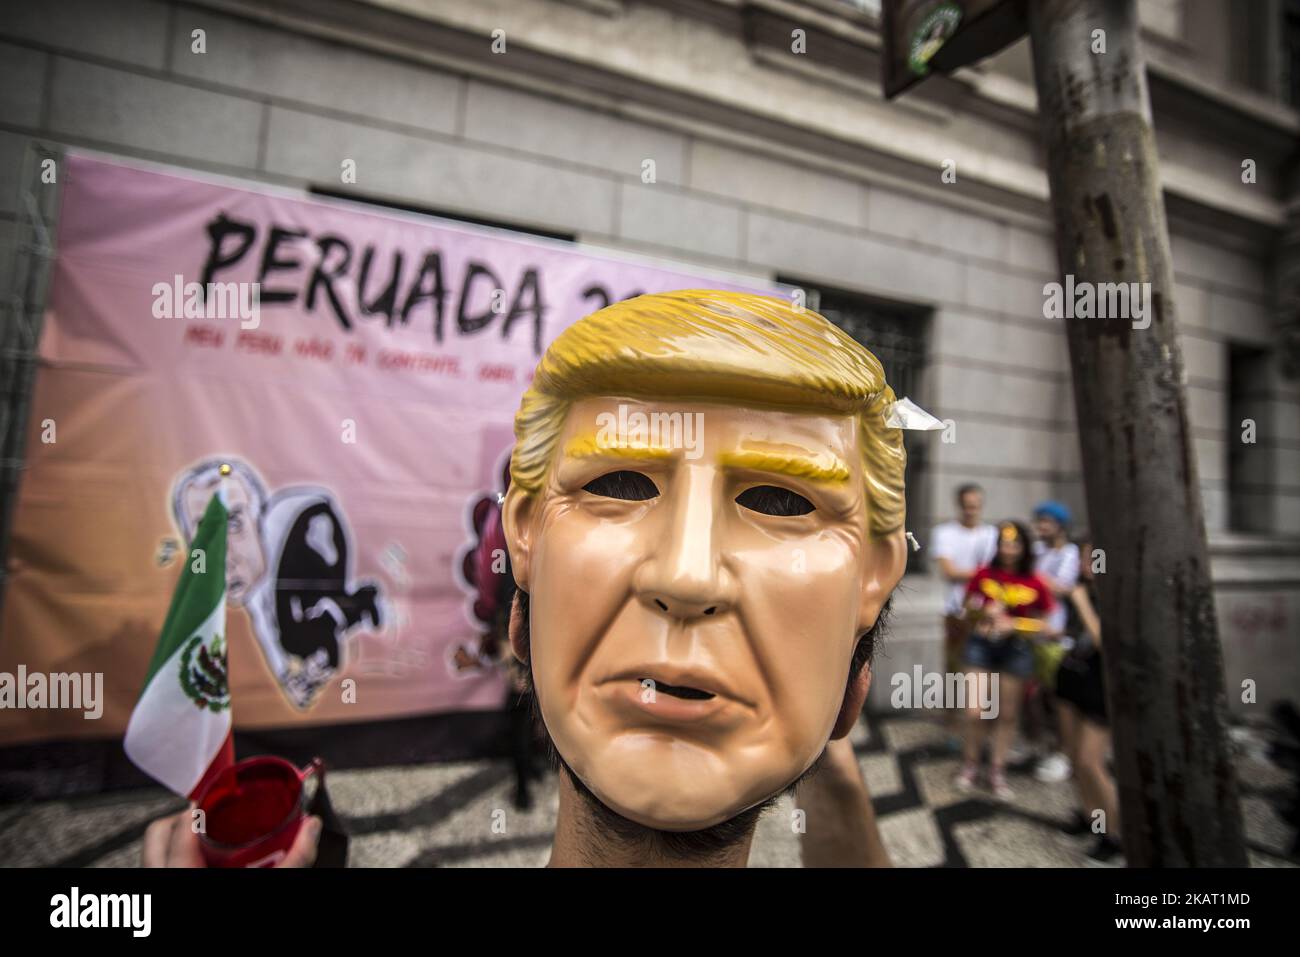 Students from the Law School of USP in São Paulo had a big party in the center of São Paulo, the traditional 'peruada' on 21 October 2017. Among the fantasies used by students were references to Mayor João Doria, President Michel Temer, President of the United States, Donald Trump, and Federal Police.The party gathered a crowd in the Largo São Francisco region. According to the Academic Center XI de Agosto, the party takes place from the mid-1940s in the form of a 'political-ethical-carnival' march. (Photo by Cris Faga/NurPhoto) Stock Photo